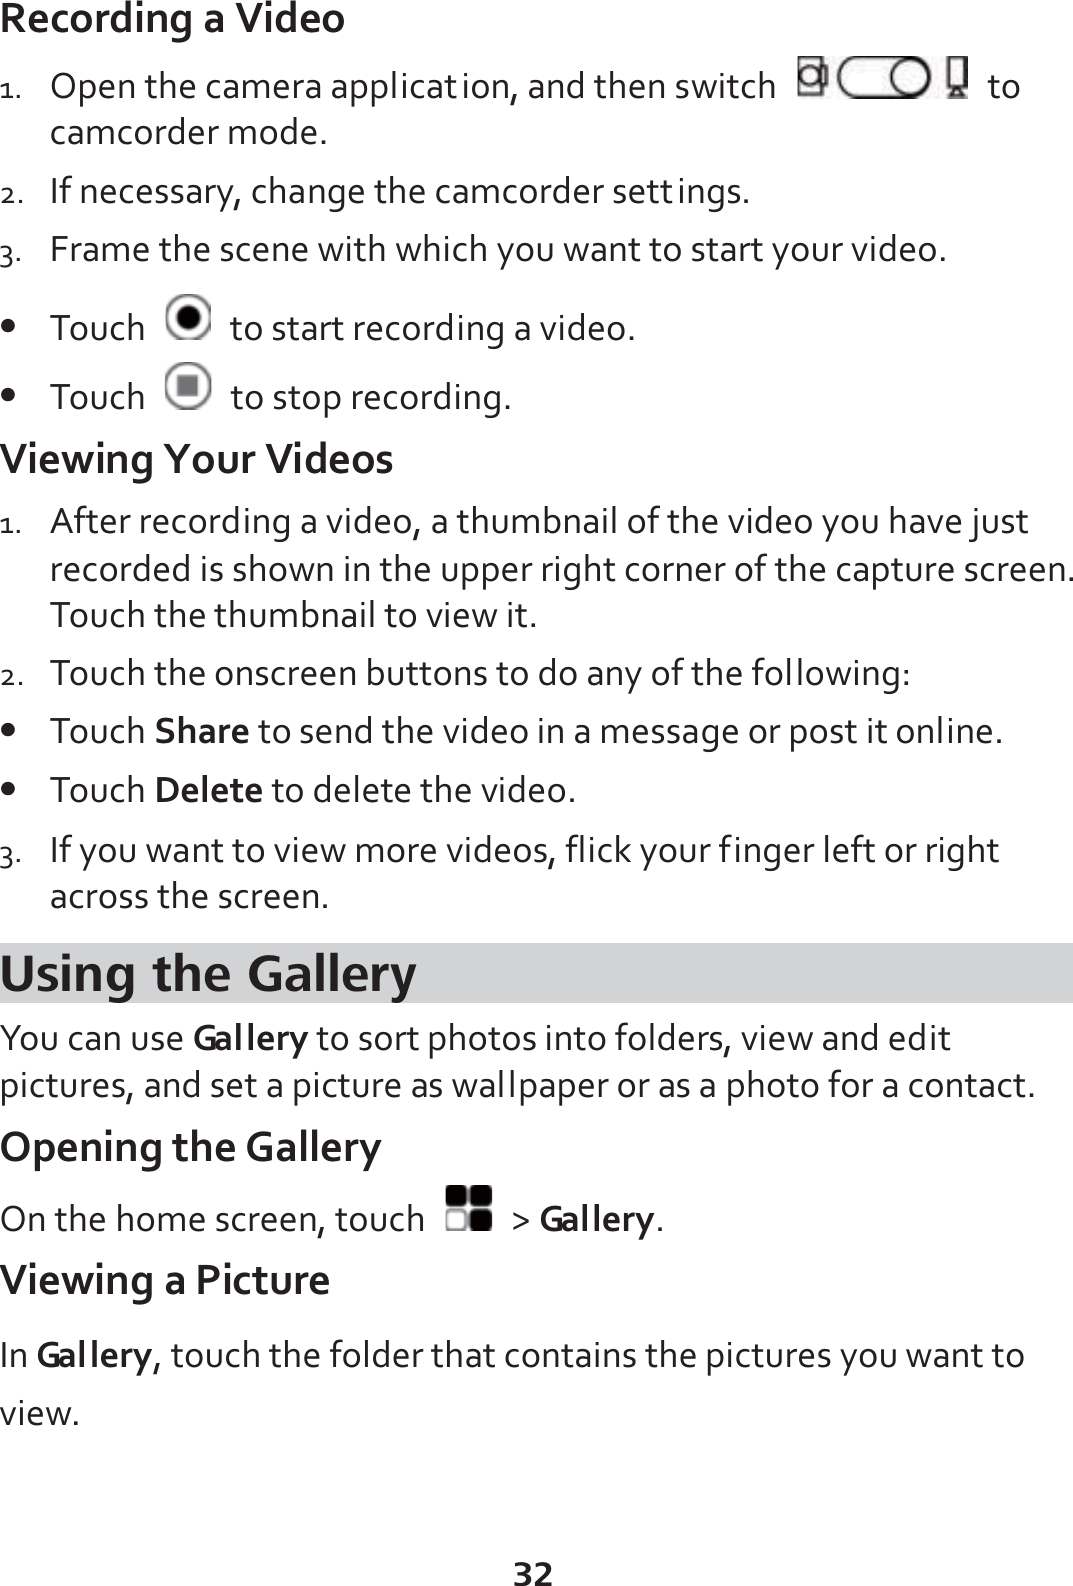 32 Recording a Video 1. Open the camera application, and then switch   to camcorder mode. 2. If necessary, change the camcorder settings. 3. Frame the scene with which you want to start your video. z Touch    to start recording a video. z Touch    to stop recording. Viewing Your Videos 1. After recording a video, a thumbnail of the video you have just recorded is shown in the upper right corner of the capture screen. Touch the thumbnail to view it. 2. Touch the onscreen buttons to do any of the following: z Touch Share to send the video in a message or post it online. z Touch Delete to delete the video. 3. If you want to view more videos, flick your finger left or right across the screen. Using the Gallery You can use Ga l l e r y  to sort photos into folders, view and edit pictures, and set a picture as wallpaper or as a photo for a contact. Opening the Gallery On the home screen, touch   &gt; Ga l l e r y . Viewing a Picture In Ga l l e r y , touch the folder that contains the pictures you want to view. 